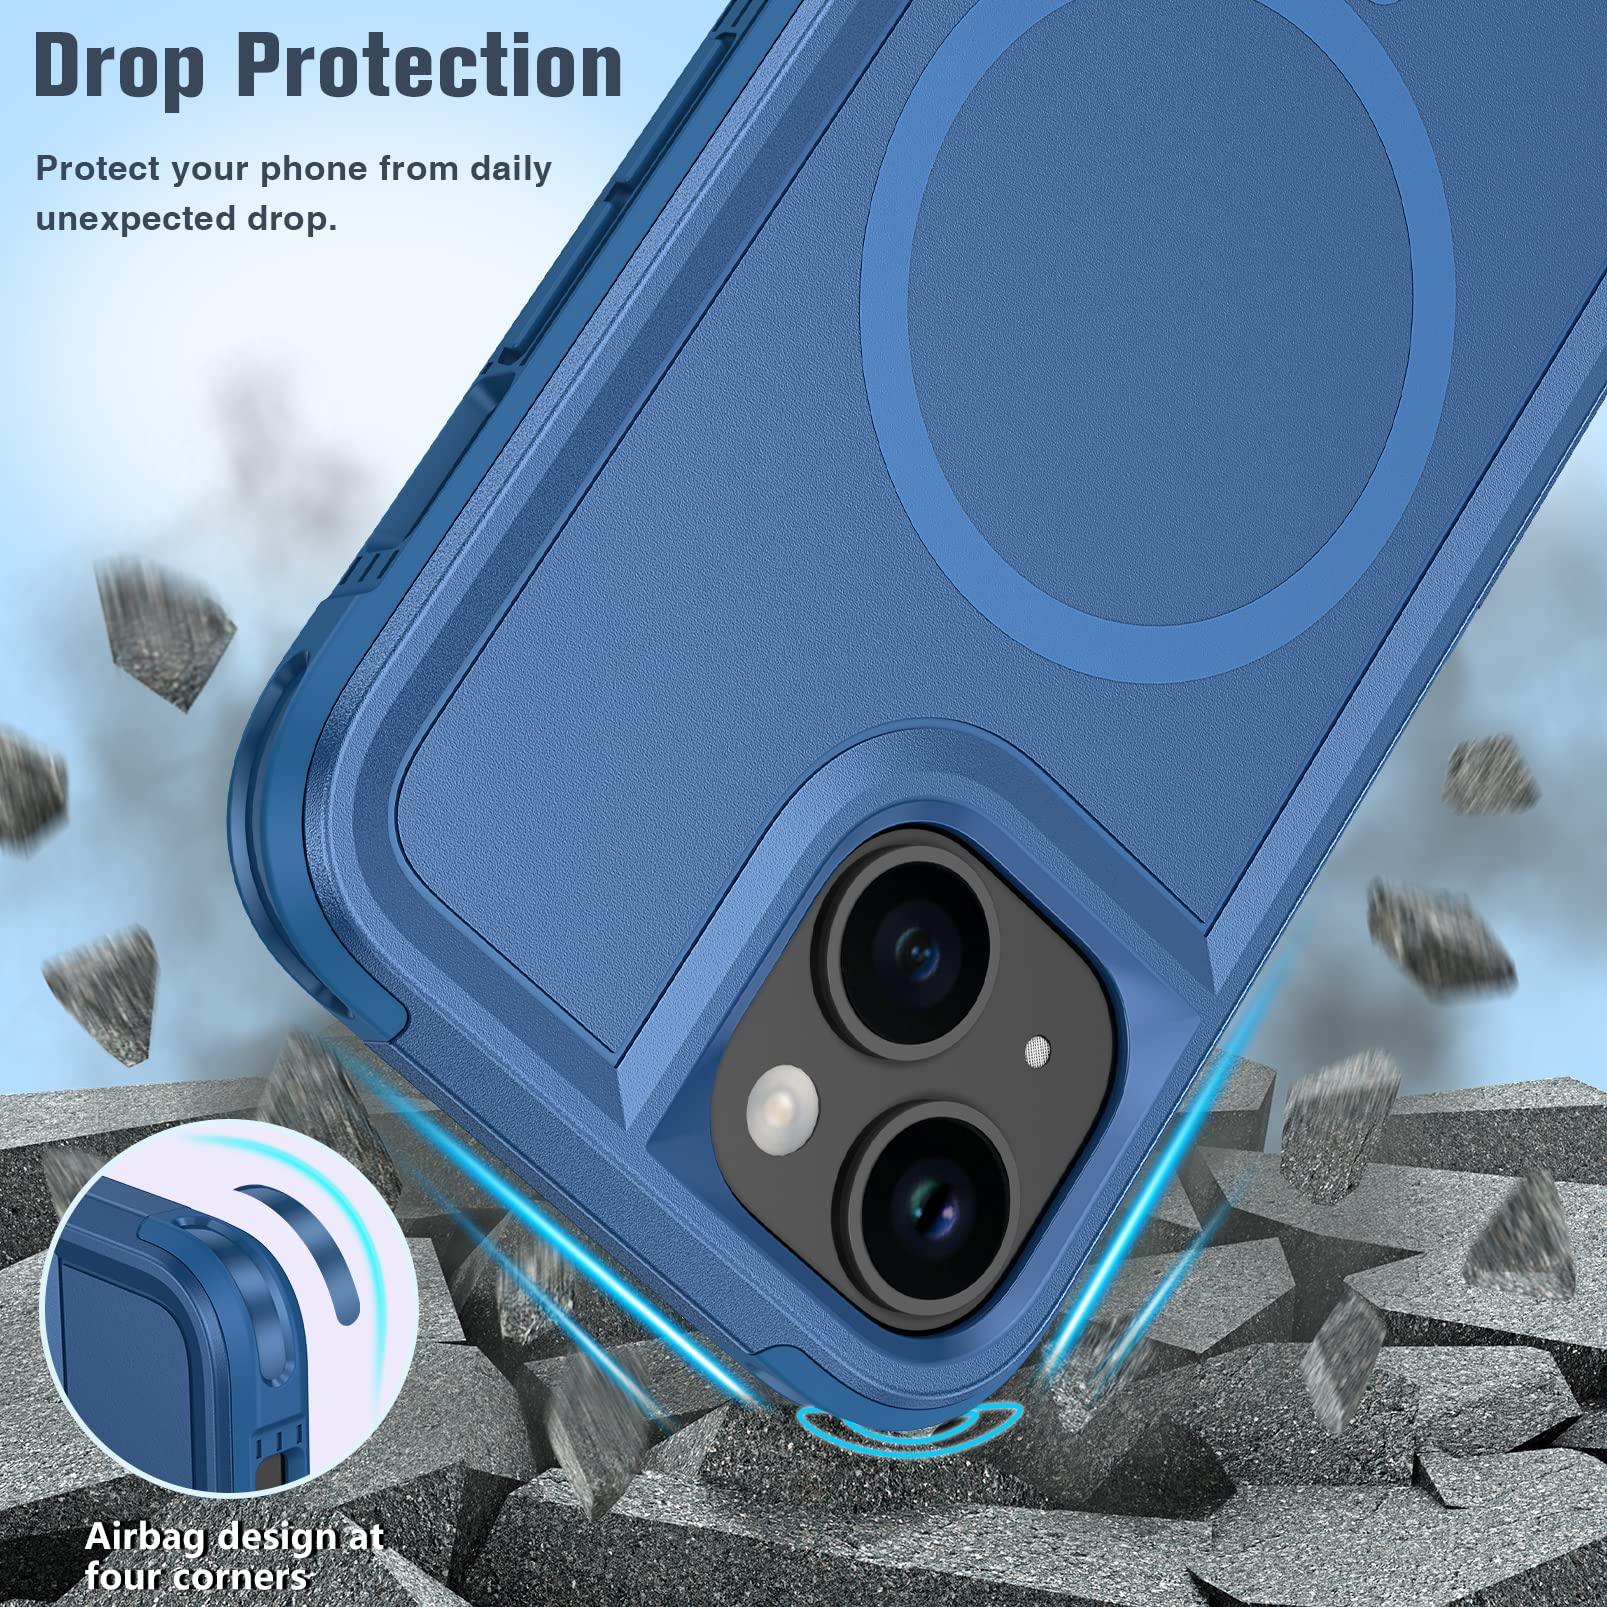 iPhone 13 iPhone 14 Phone Case Magnetic Dual Layer Military Grade Drop Shockproof Protection - FNTCASE OFFICIAL